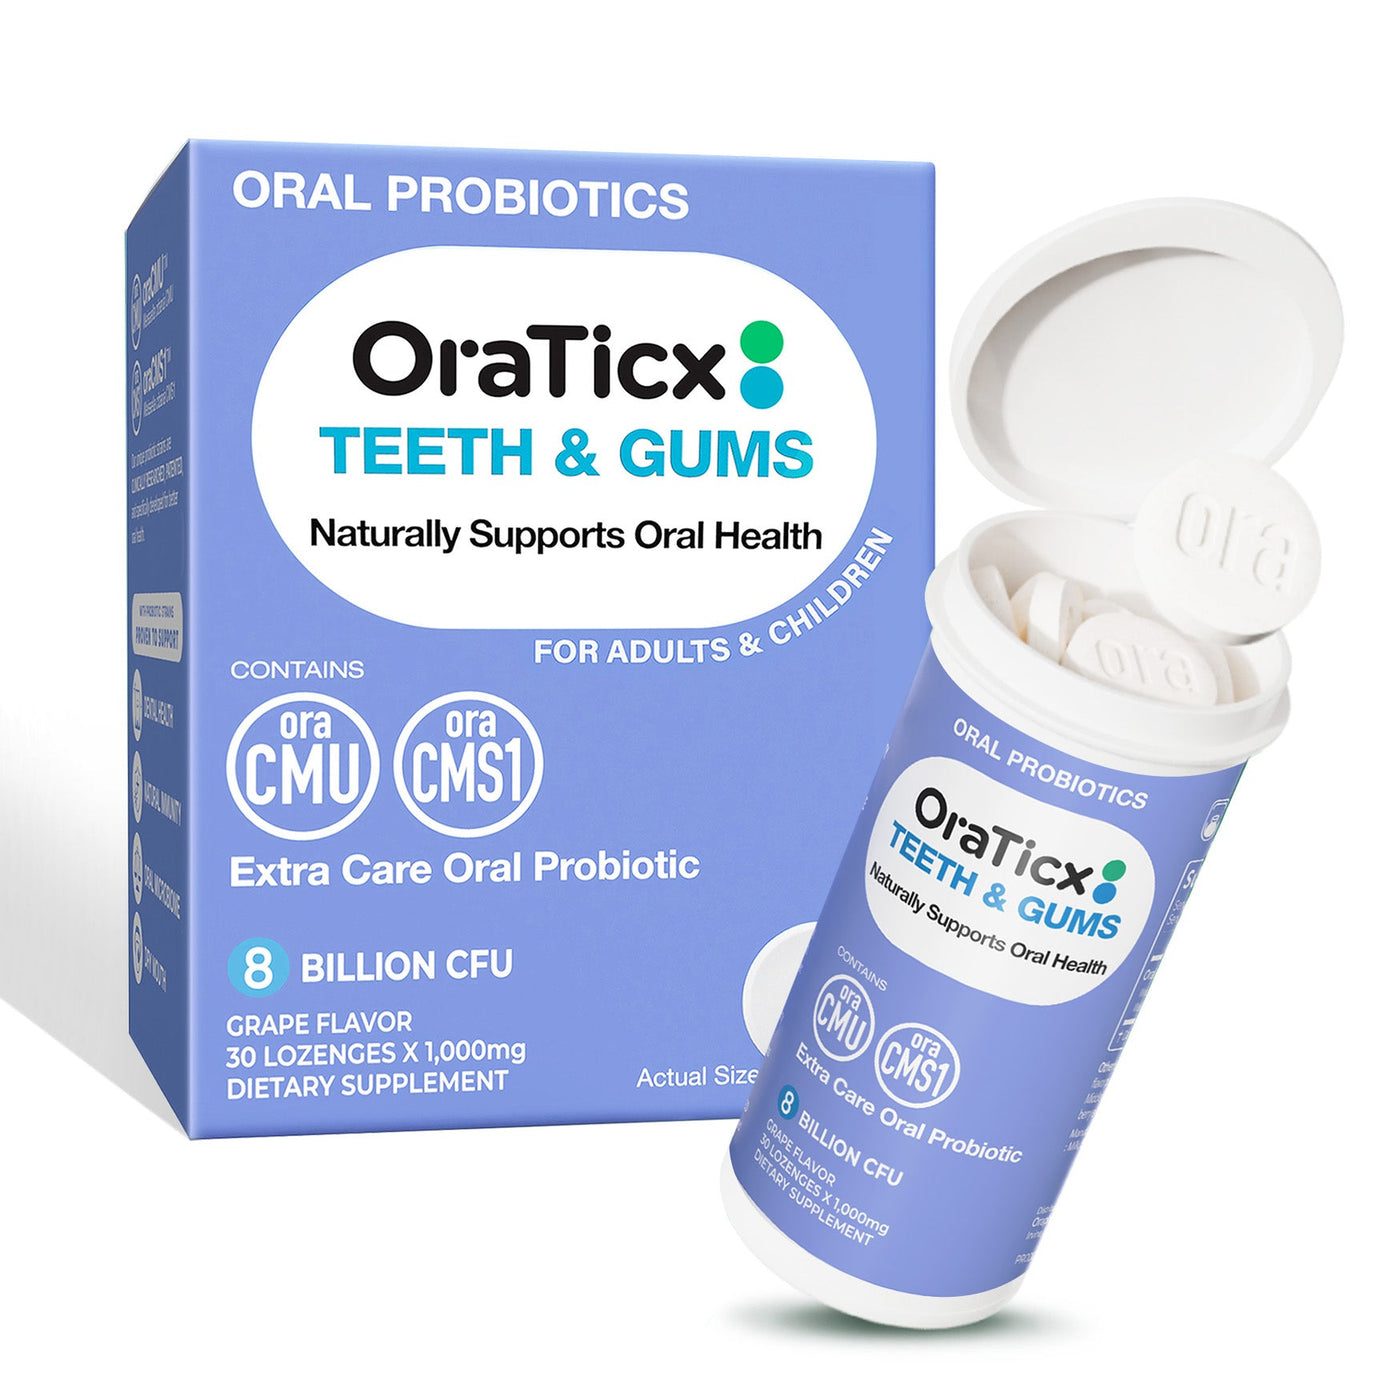 OraTicx Teeth & Gums Dental Probiotics help replace harmful microbes to restore the balance between oral microbiome 